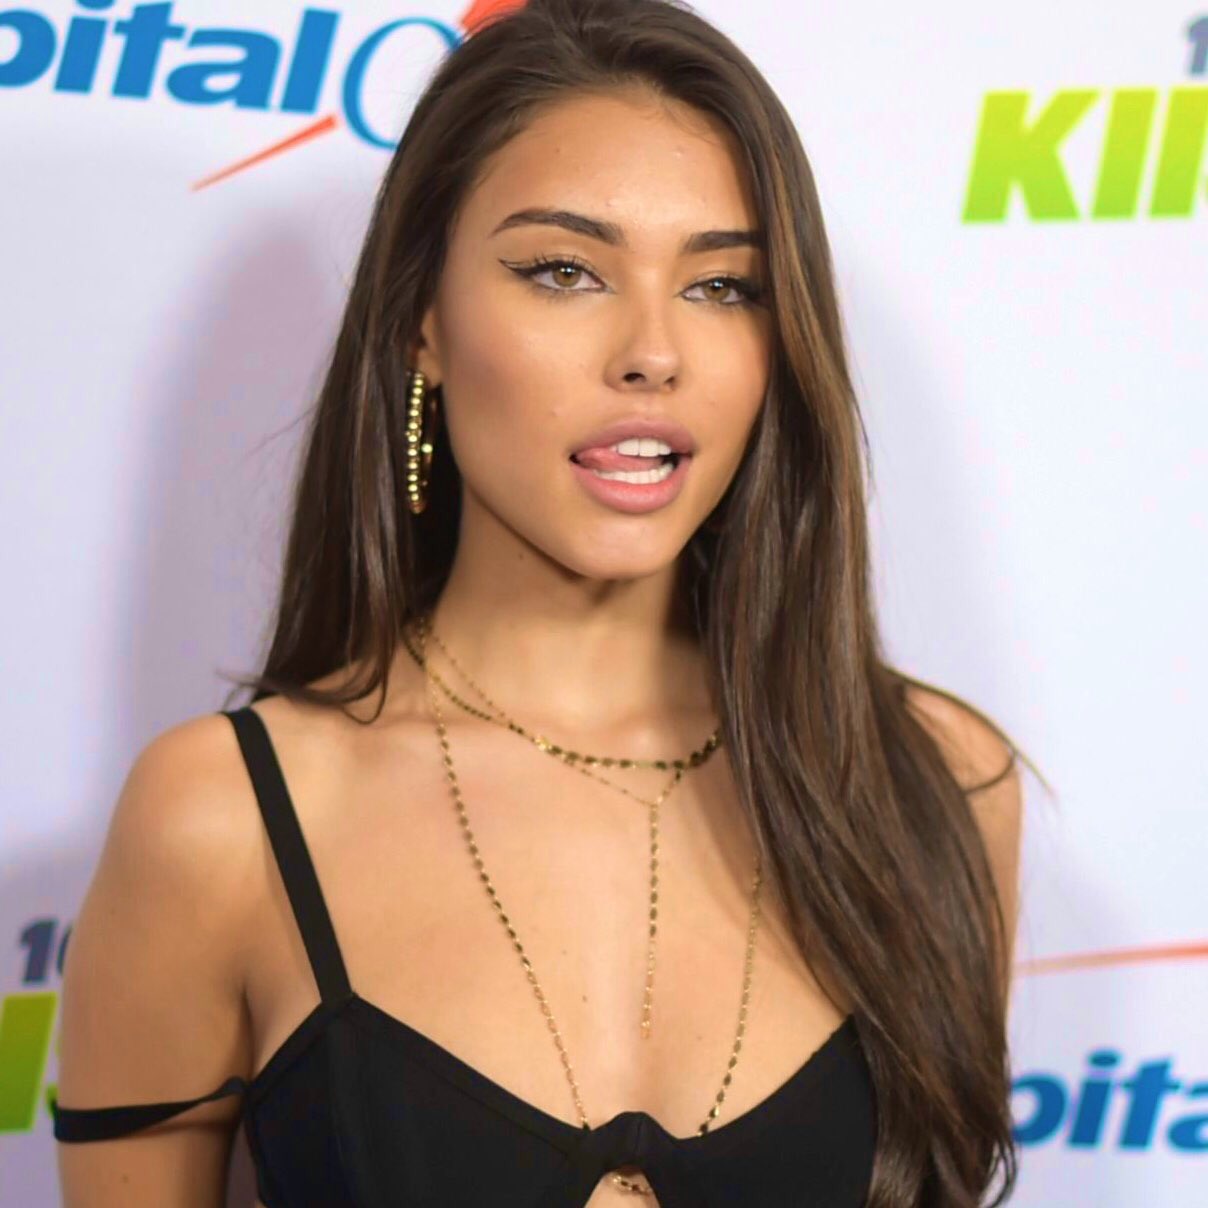 Madison Beer Portrait at KIIS-FM Wallpapers